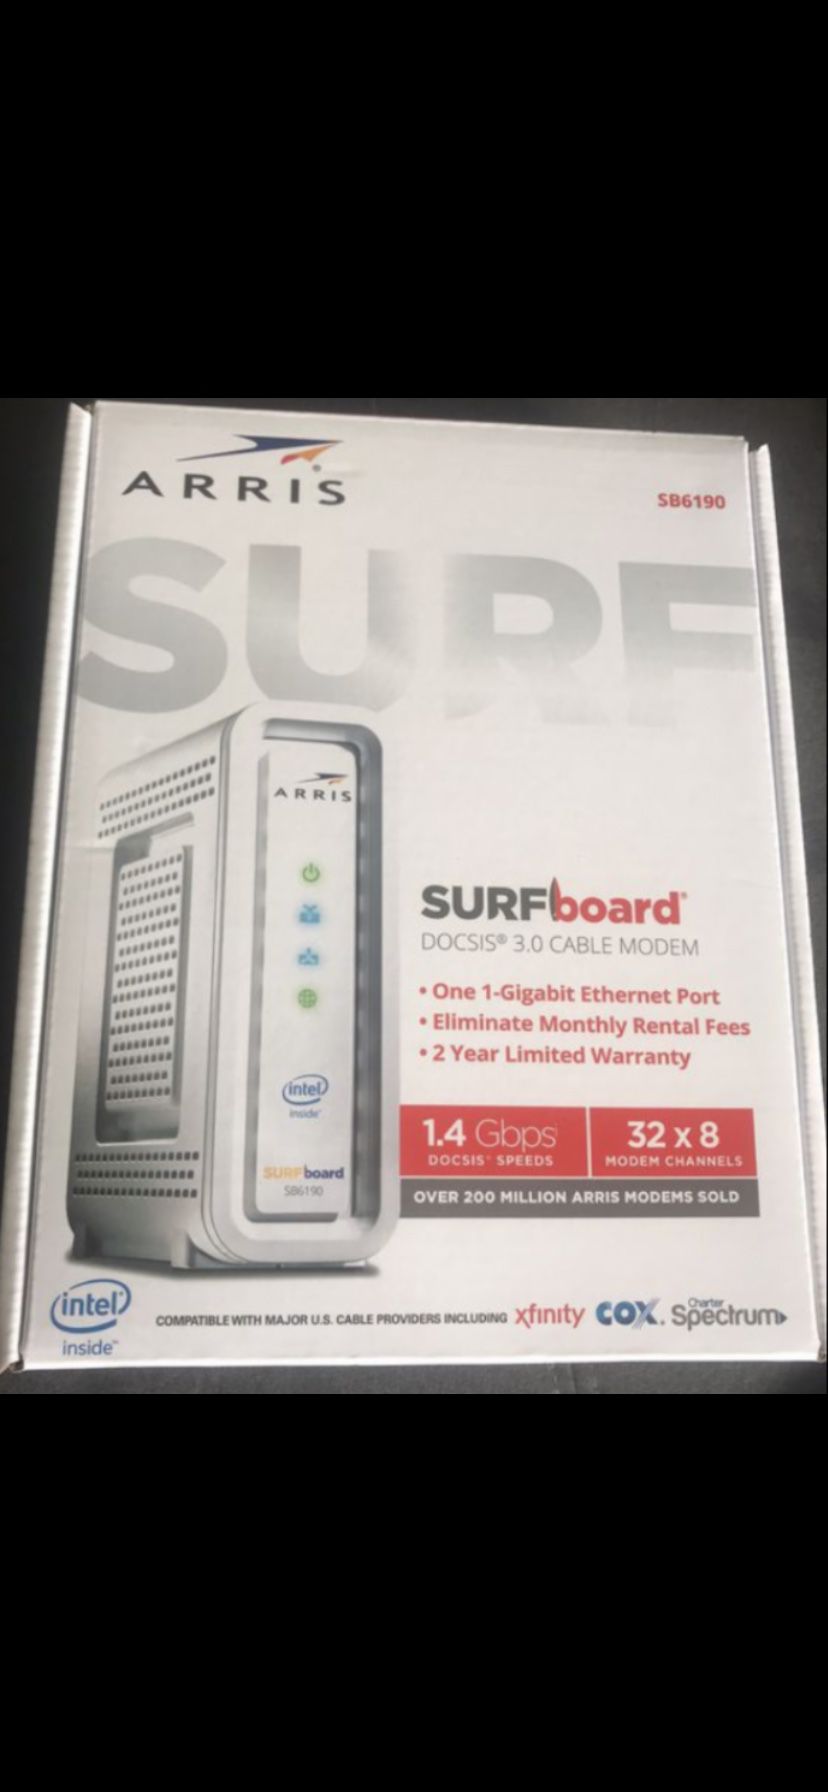 Arris cable modem surfboard docsis 3.0 brand New